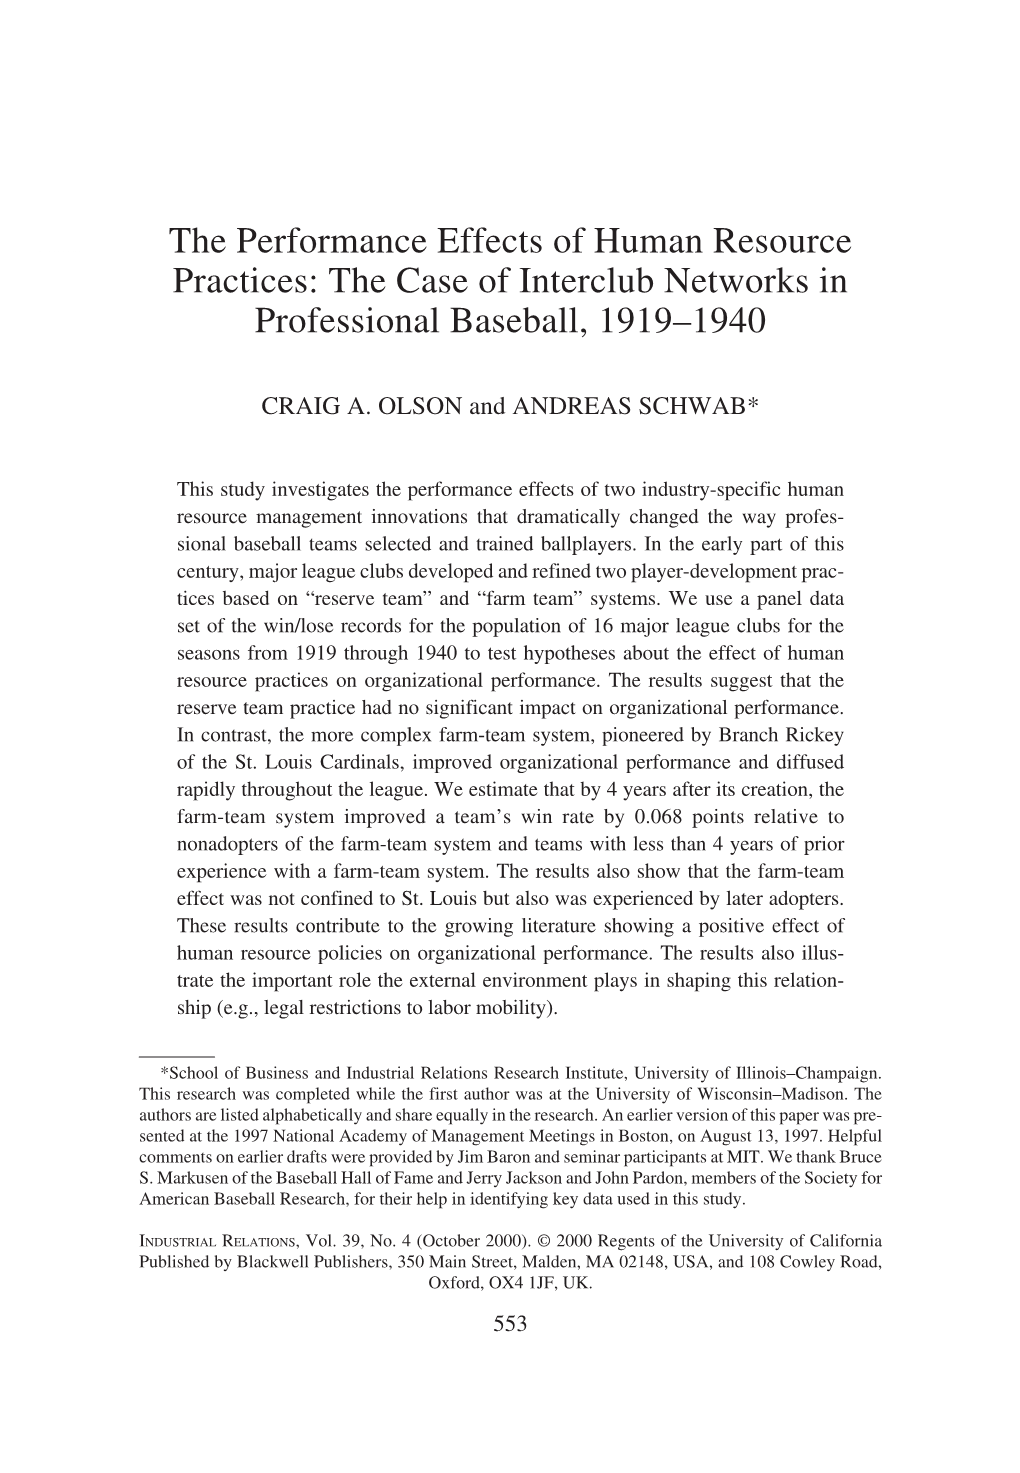 The Case of Interclub Networks in Professional Baseball, 1919–1940